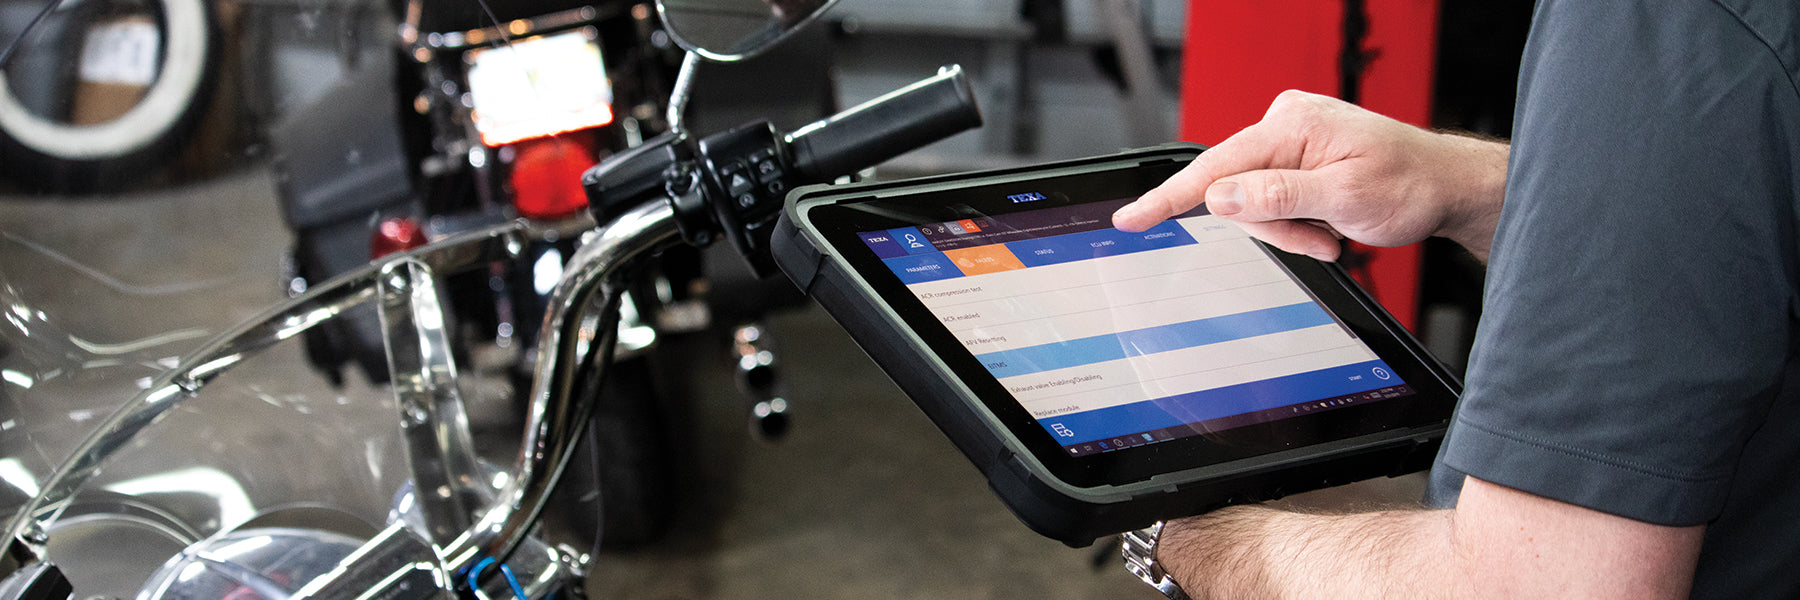 Worker looking at a tablet with TEXA Bike Information